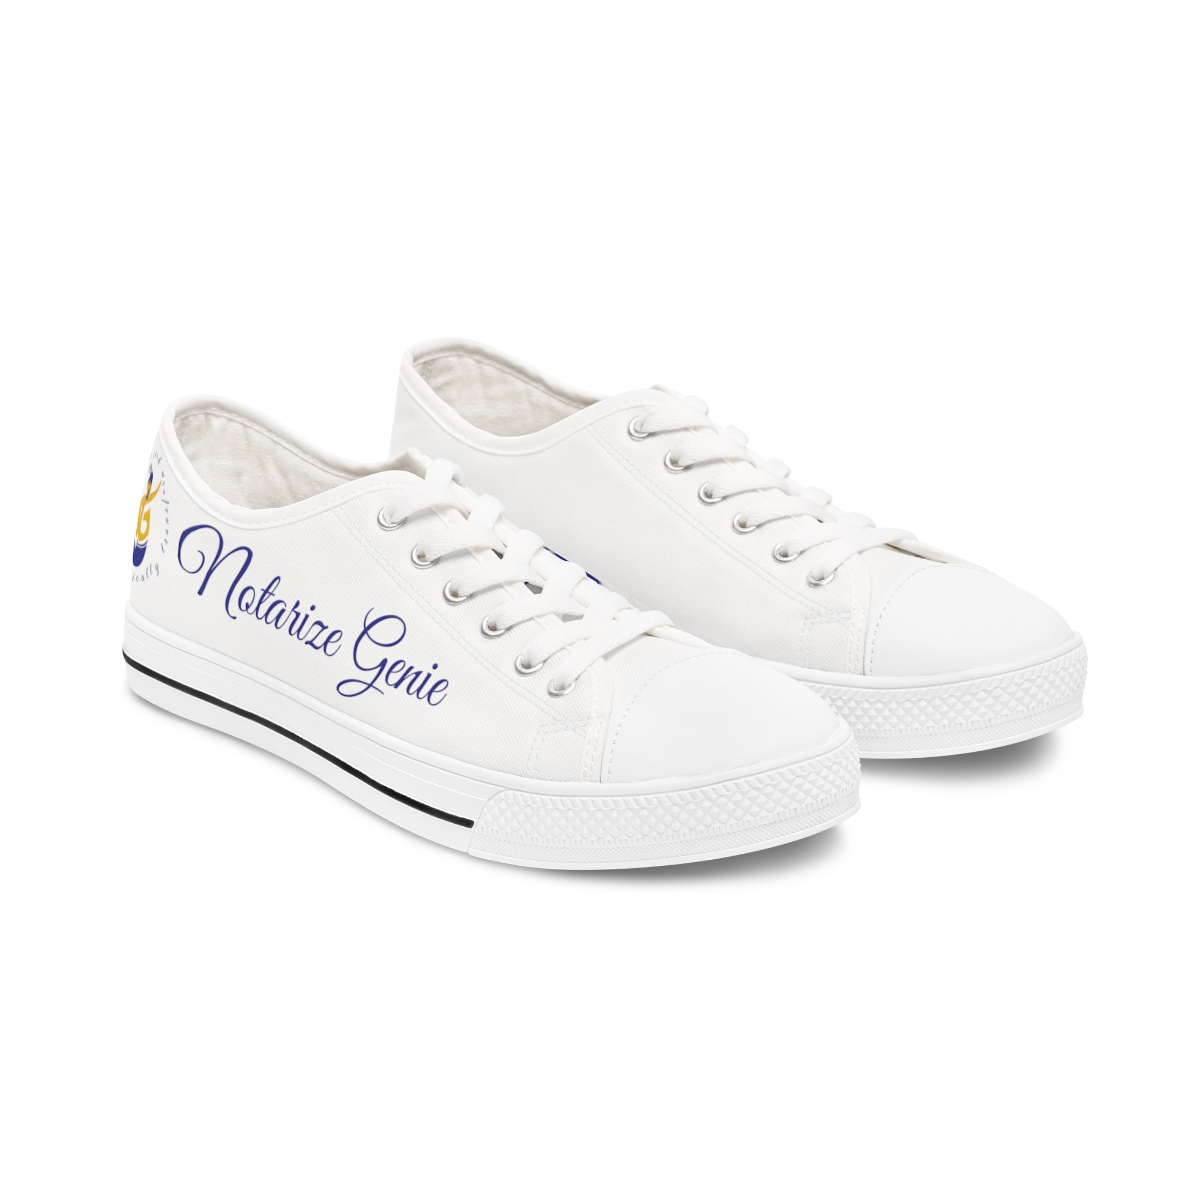 Women's Low Top Sneakers product thumbnail image